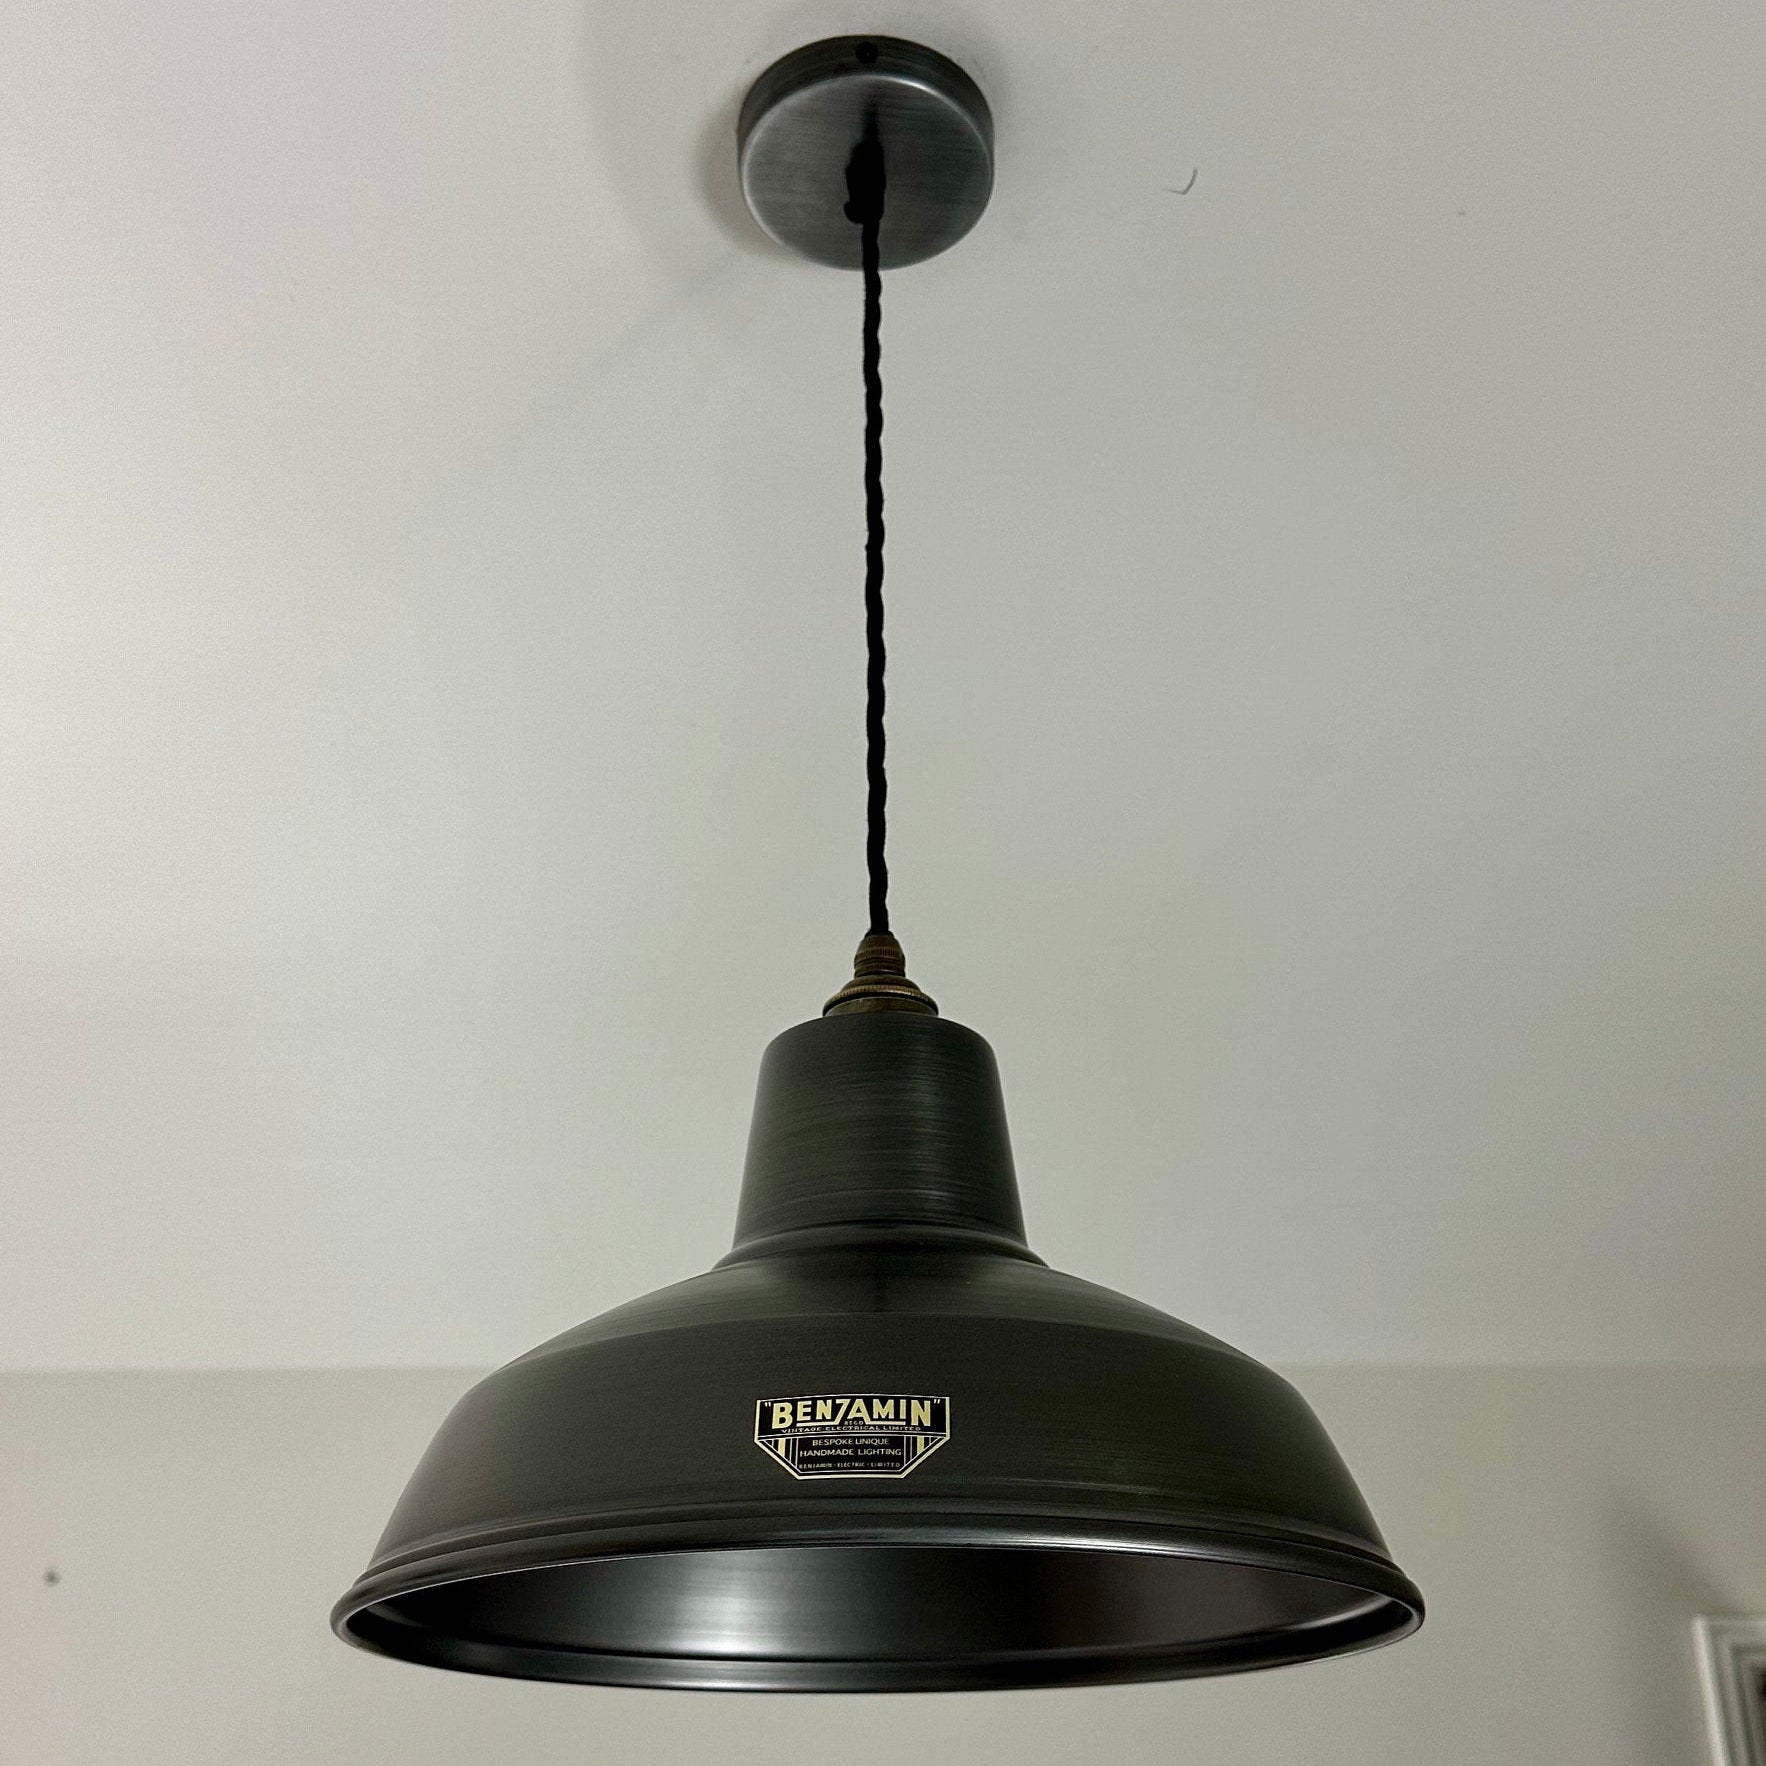 Filby ~ Pewter Grey Solid Steel Reflector Industrial Shade Pendant Set Light | Ceiling Dining Room | Kitchen Table | Vintage | Filament Bulb